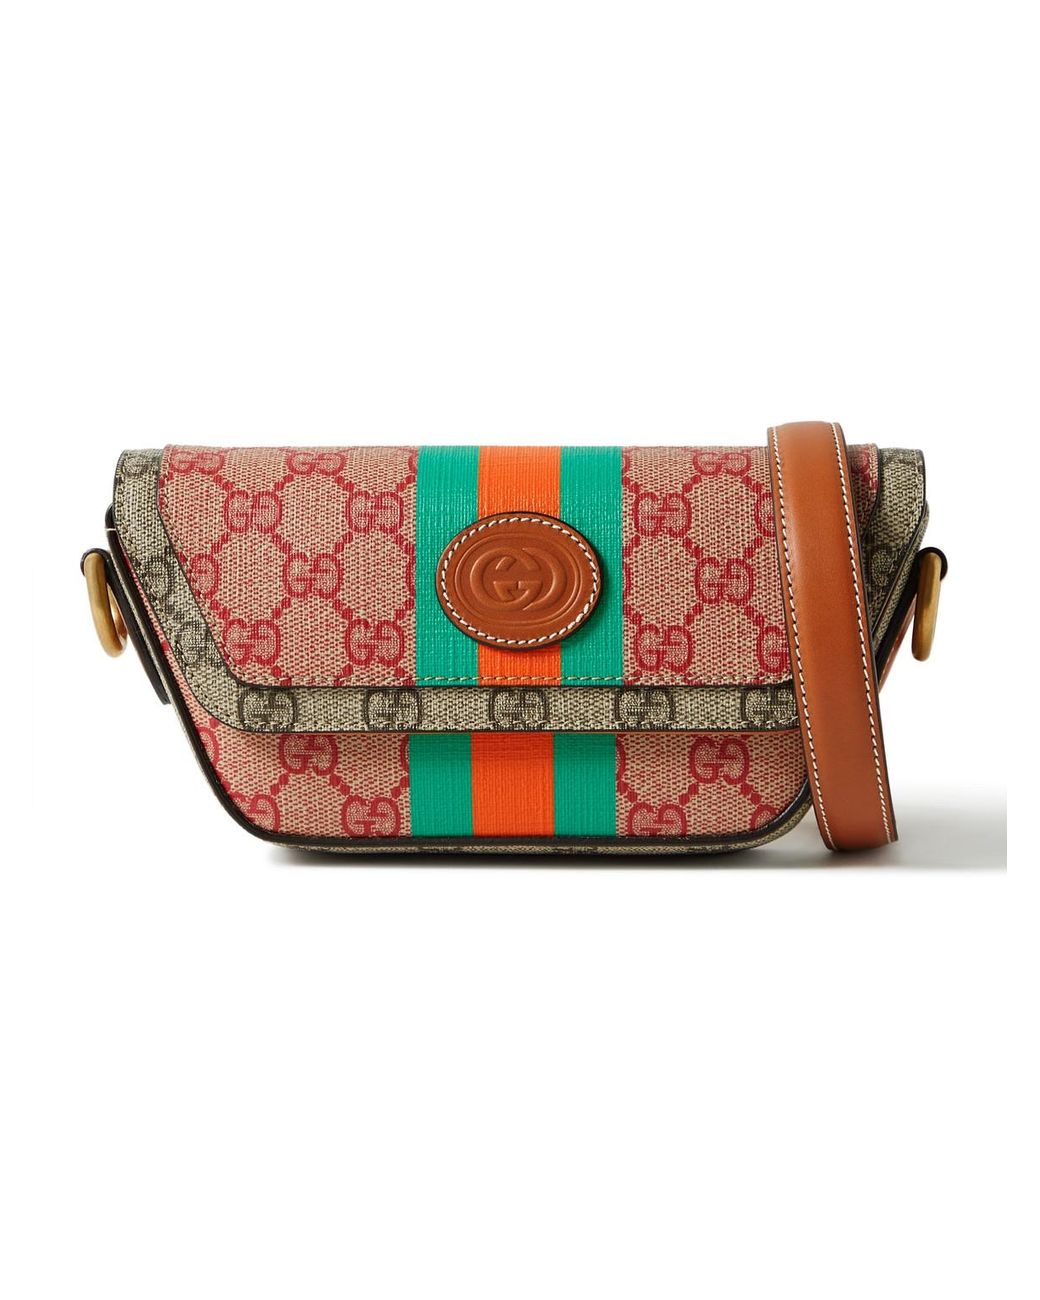 GUCCI Ophidia Leather-Trimmed Monogrammed Coated-Canvas Messenger